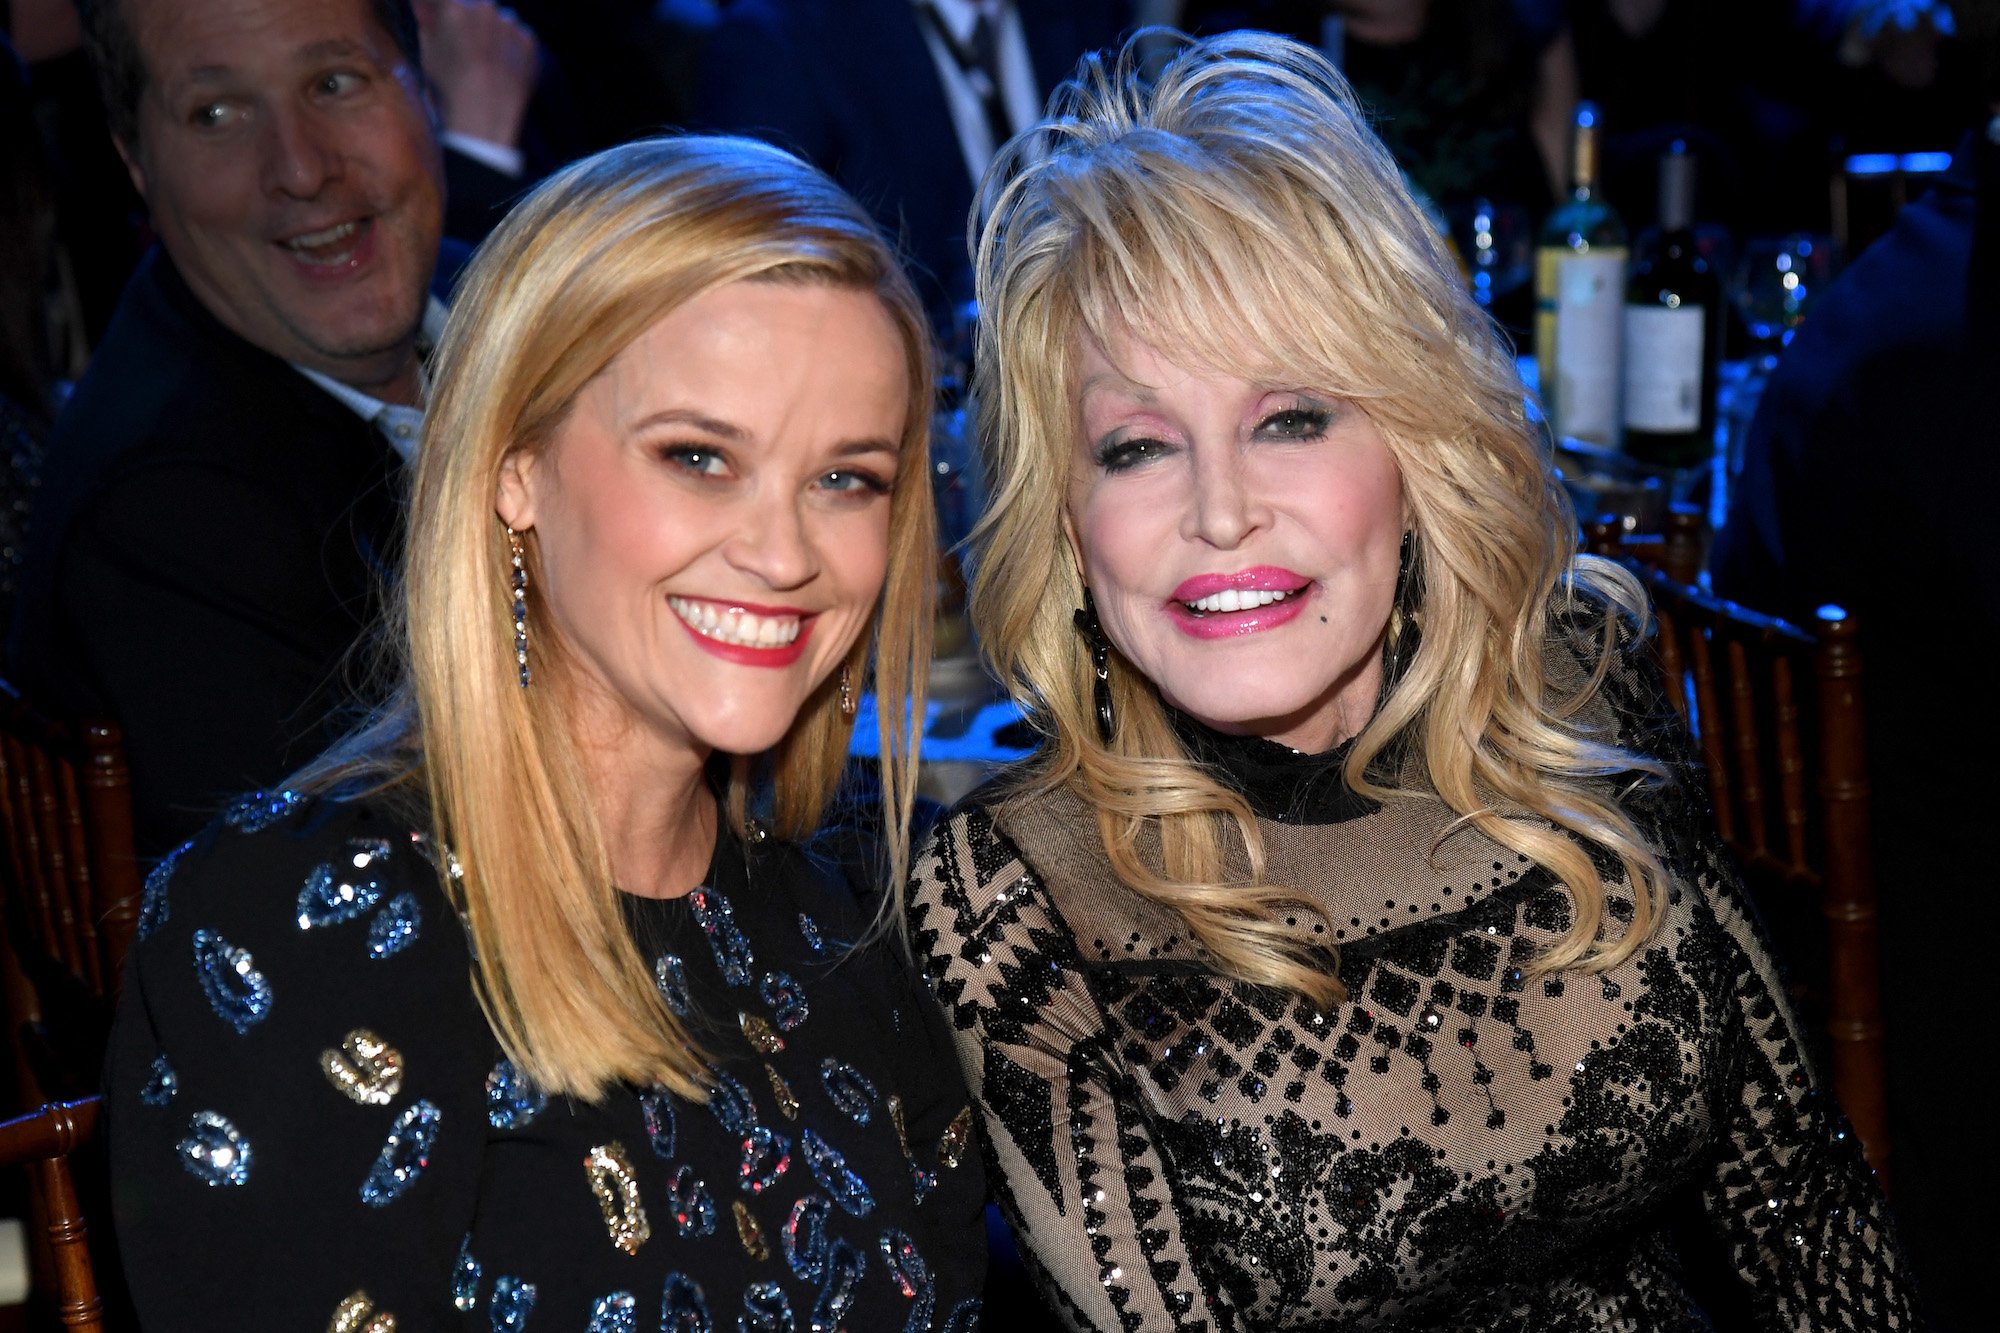 Reese Witherspoon and Dolly Parton attending the MusiCares Person Of The Year ceremony in 2019